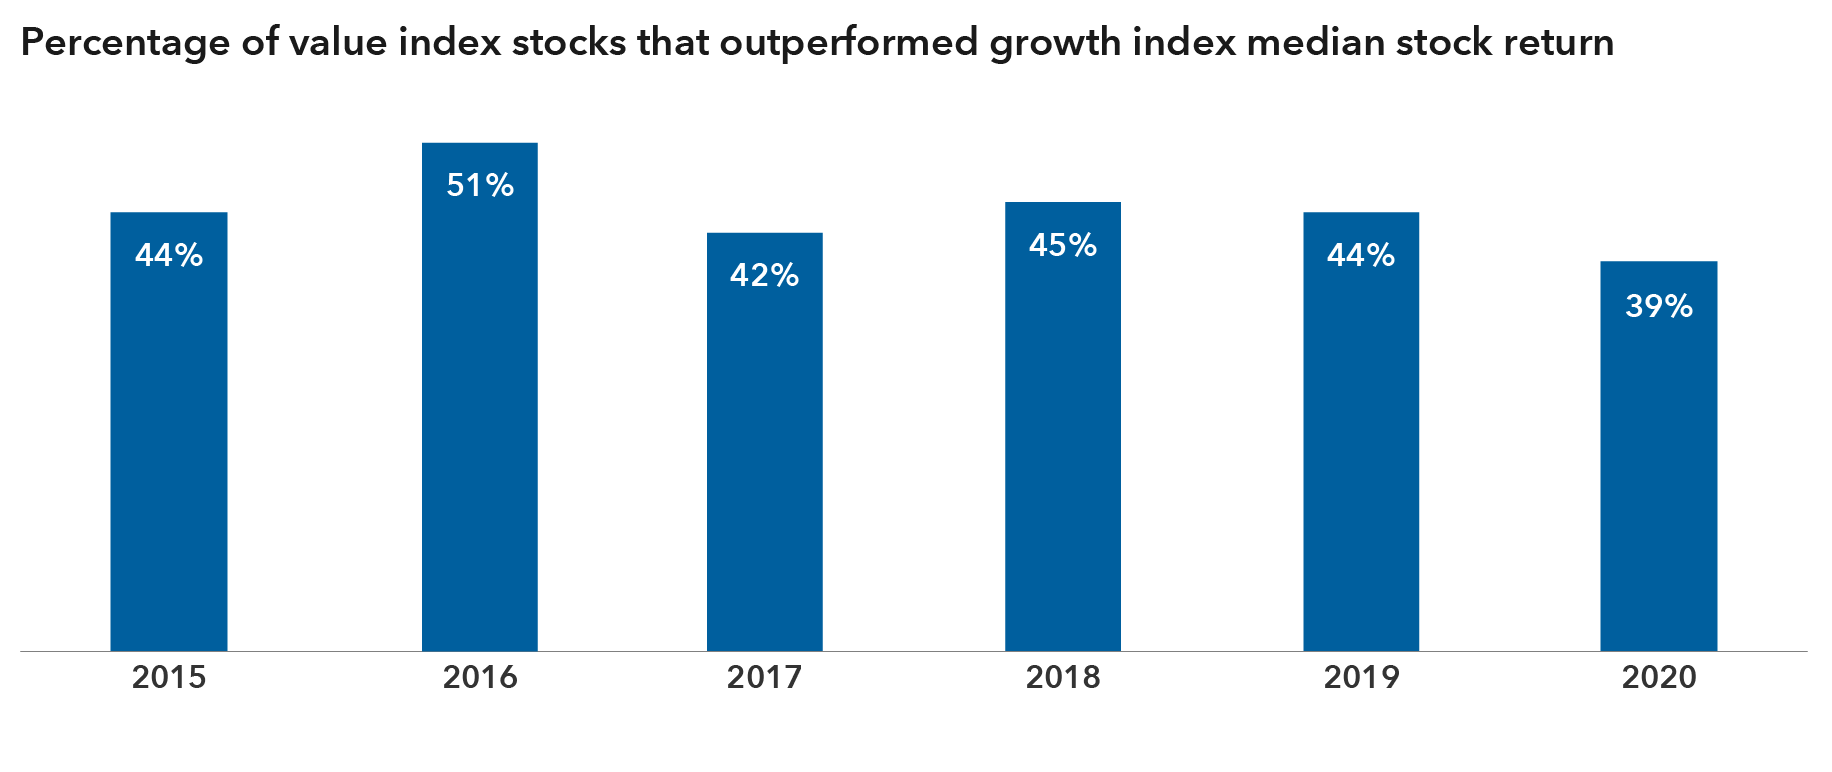 A bar chart showing the percentage of stocks in the MSCI value index that outperformed the median stock return in the MSCI growth index per year from 2015 to 2020. In 2015, 44% of stocks in the value index outperformed the median return of stocks in the growth index. 2016: 51%; 2017: 42%; 2018: 45%; 2019: 44%; 2020: 39%. 